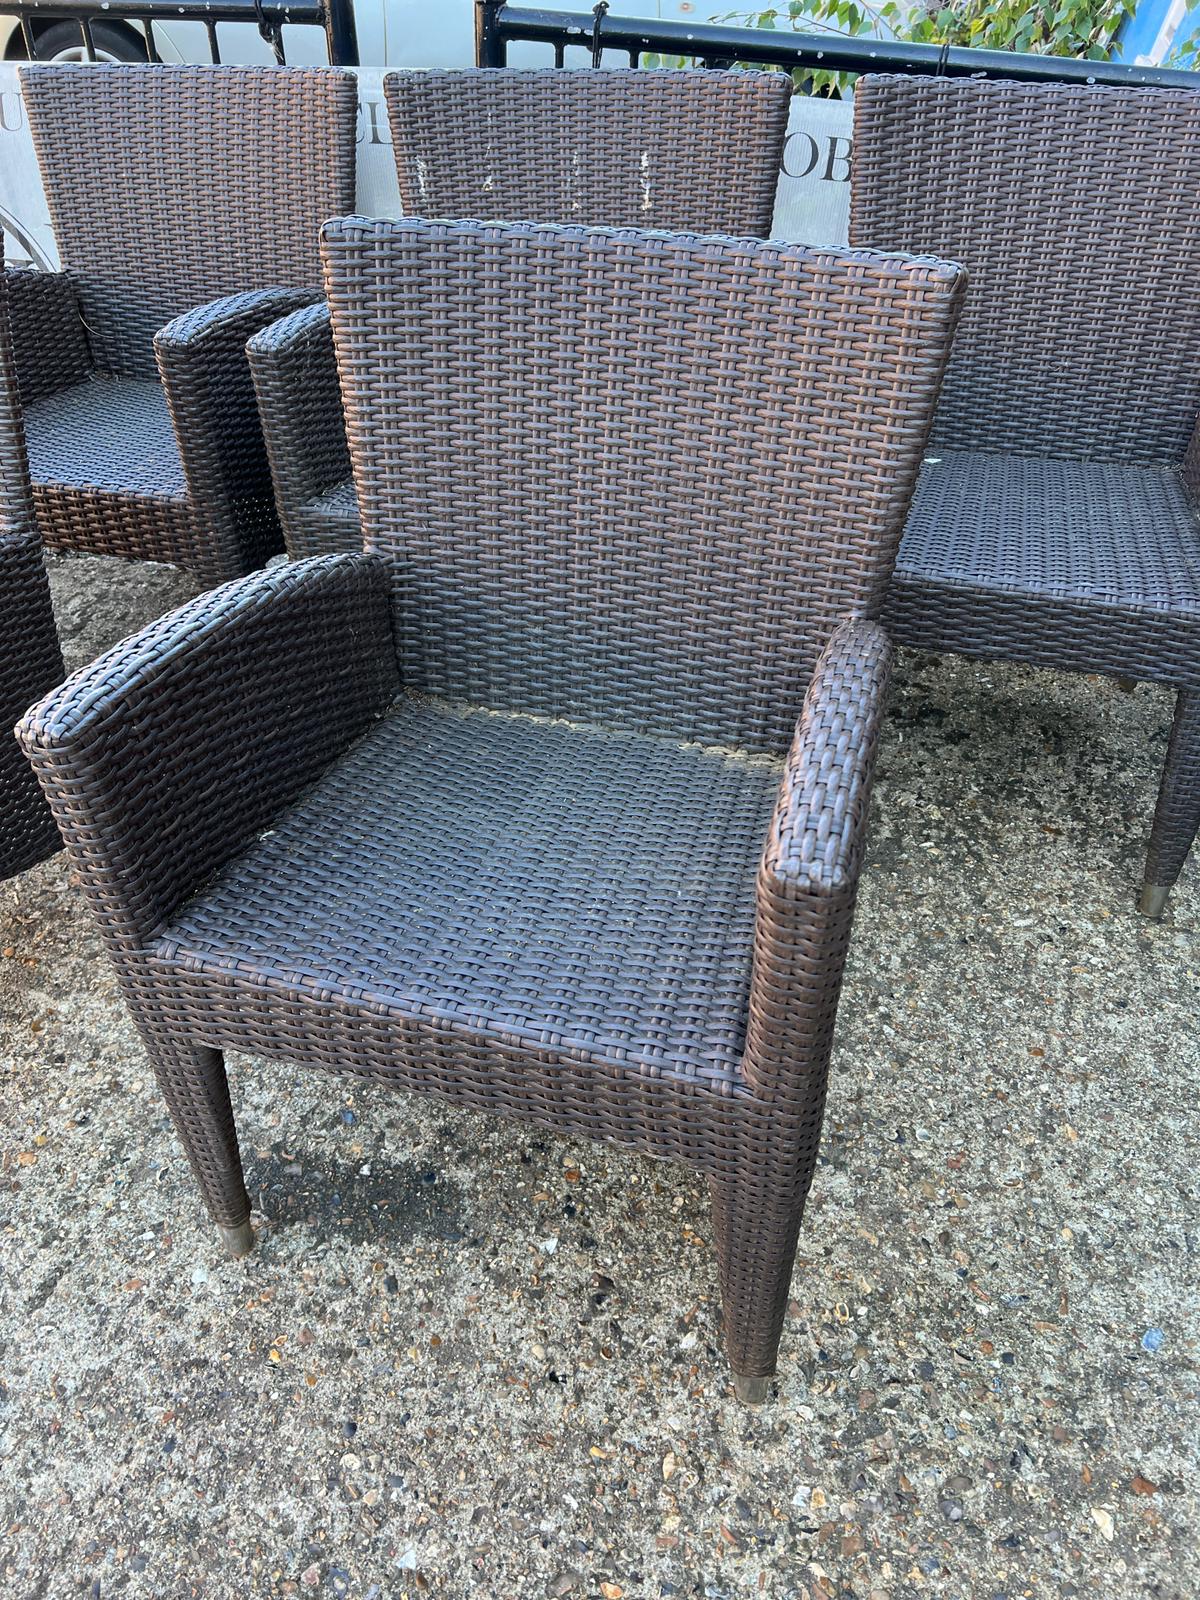 A set of eight garden chairs in a rattan style by Skyline Design UK - Image 2 of 4